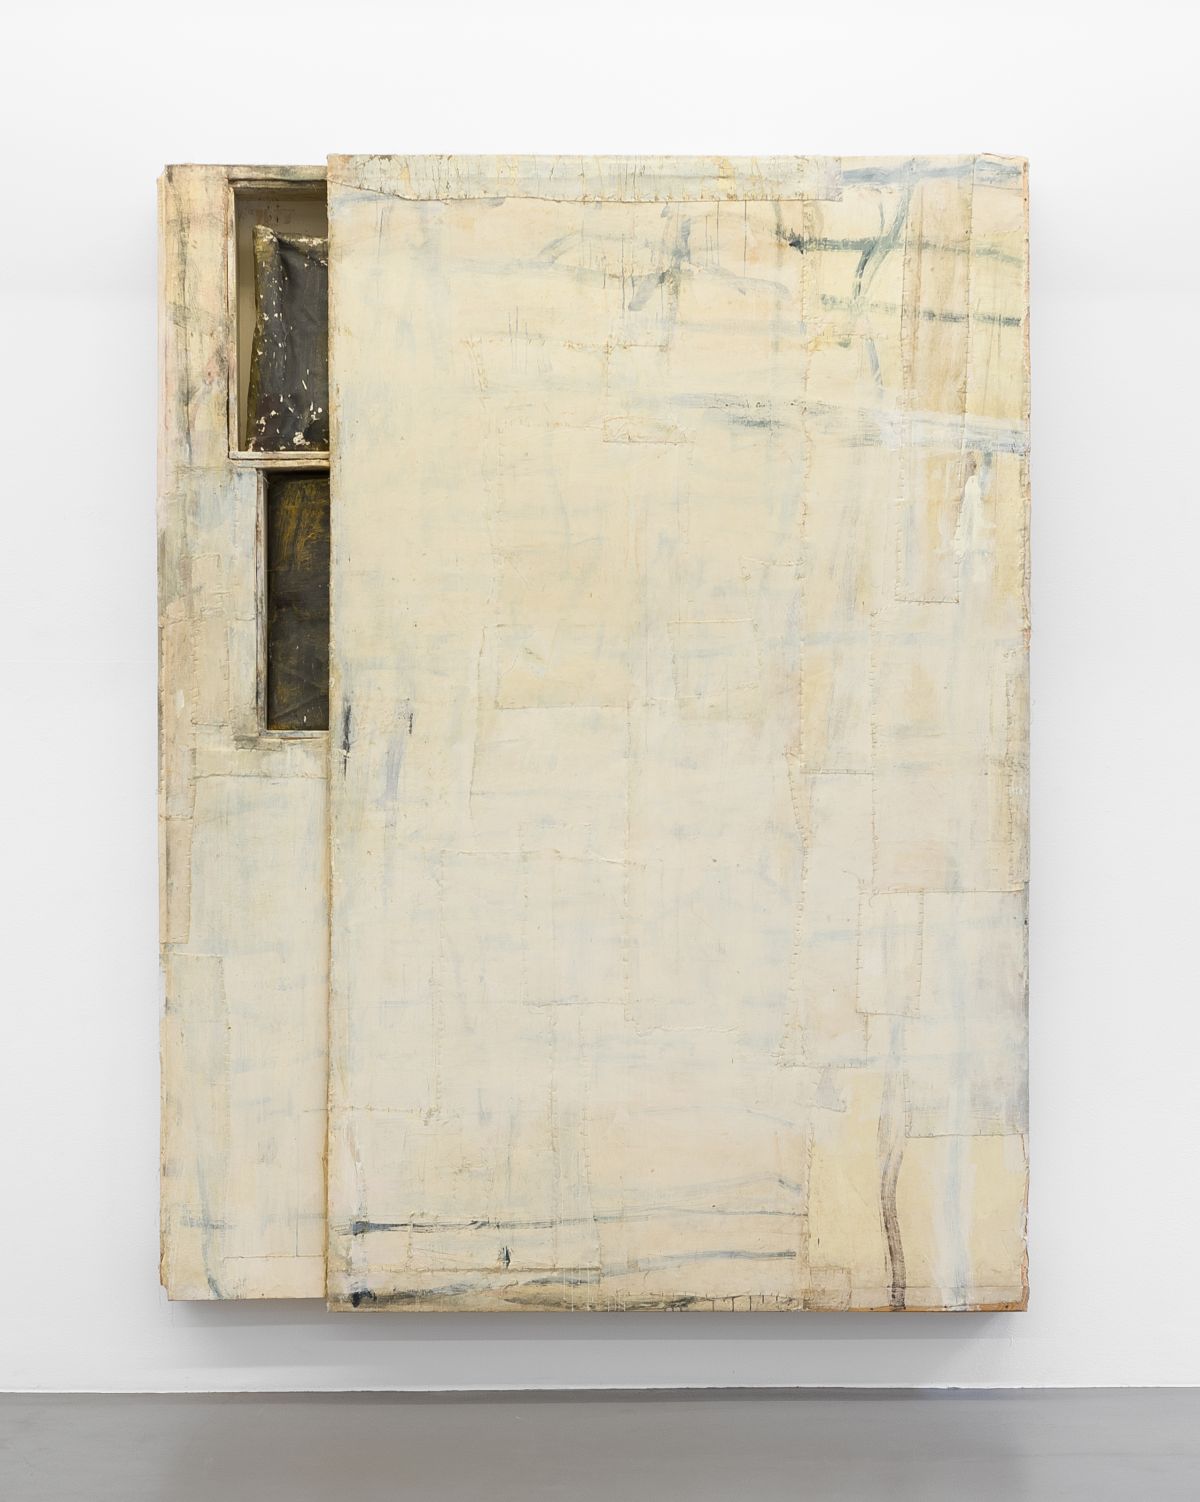 Lawrence Carroll, ‘ Untitled (slip painting)’, 2006, Oil, wax, house paint, staples, canvas on wood, 2 painted tarps